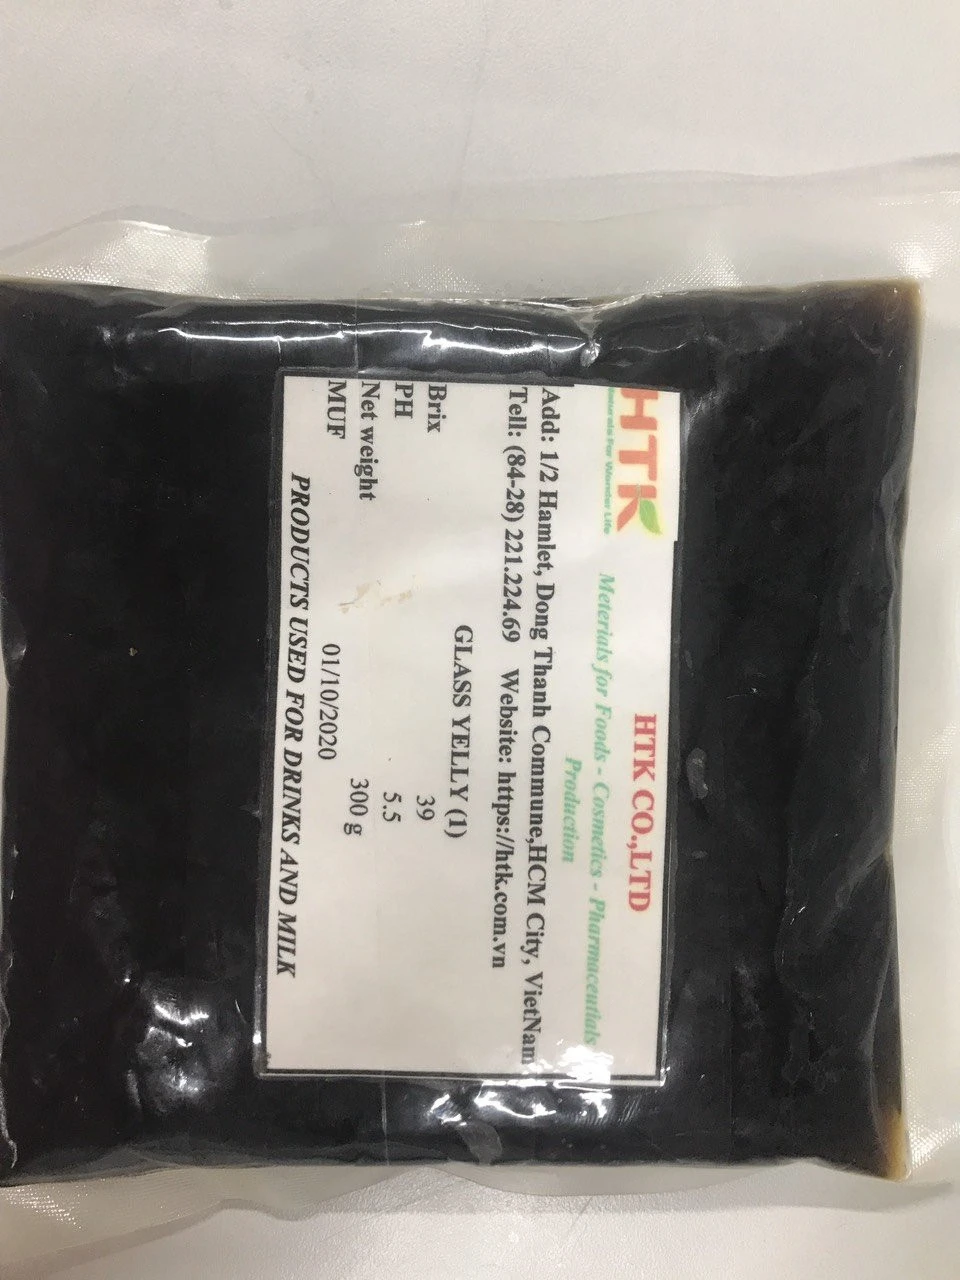 Low price TOP CLASS GRASS JELLY - HERBAL GRASS JELLY from Viet Nam